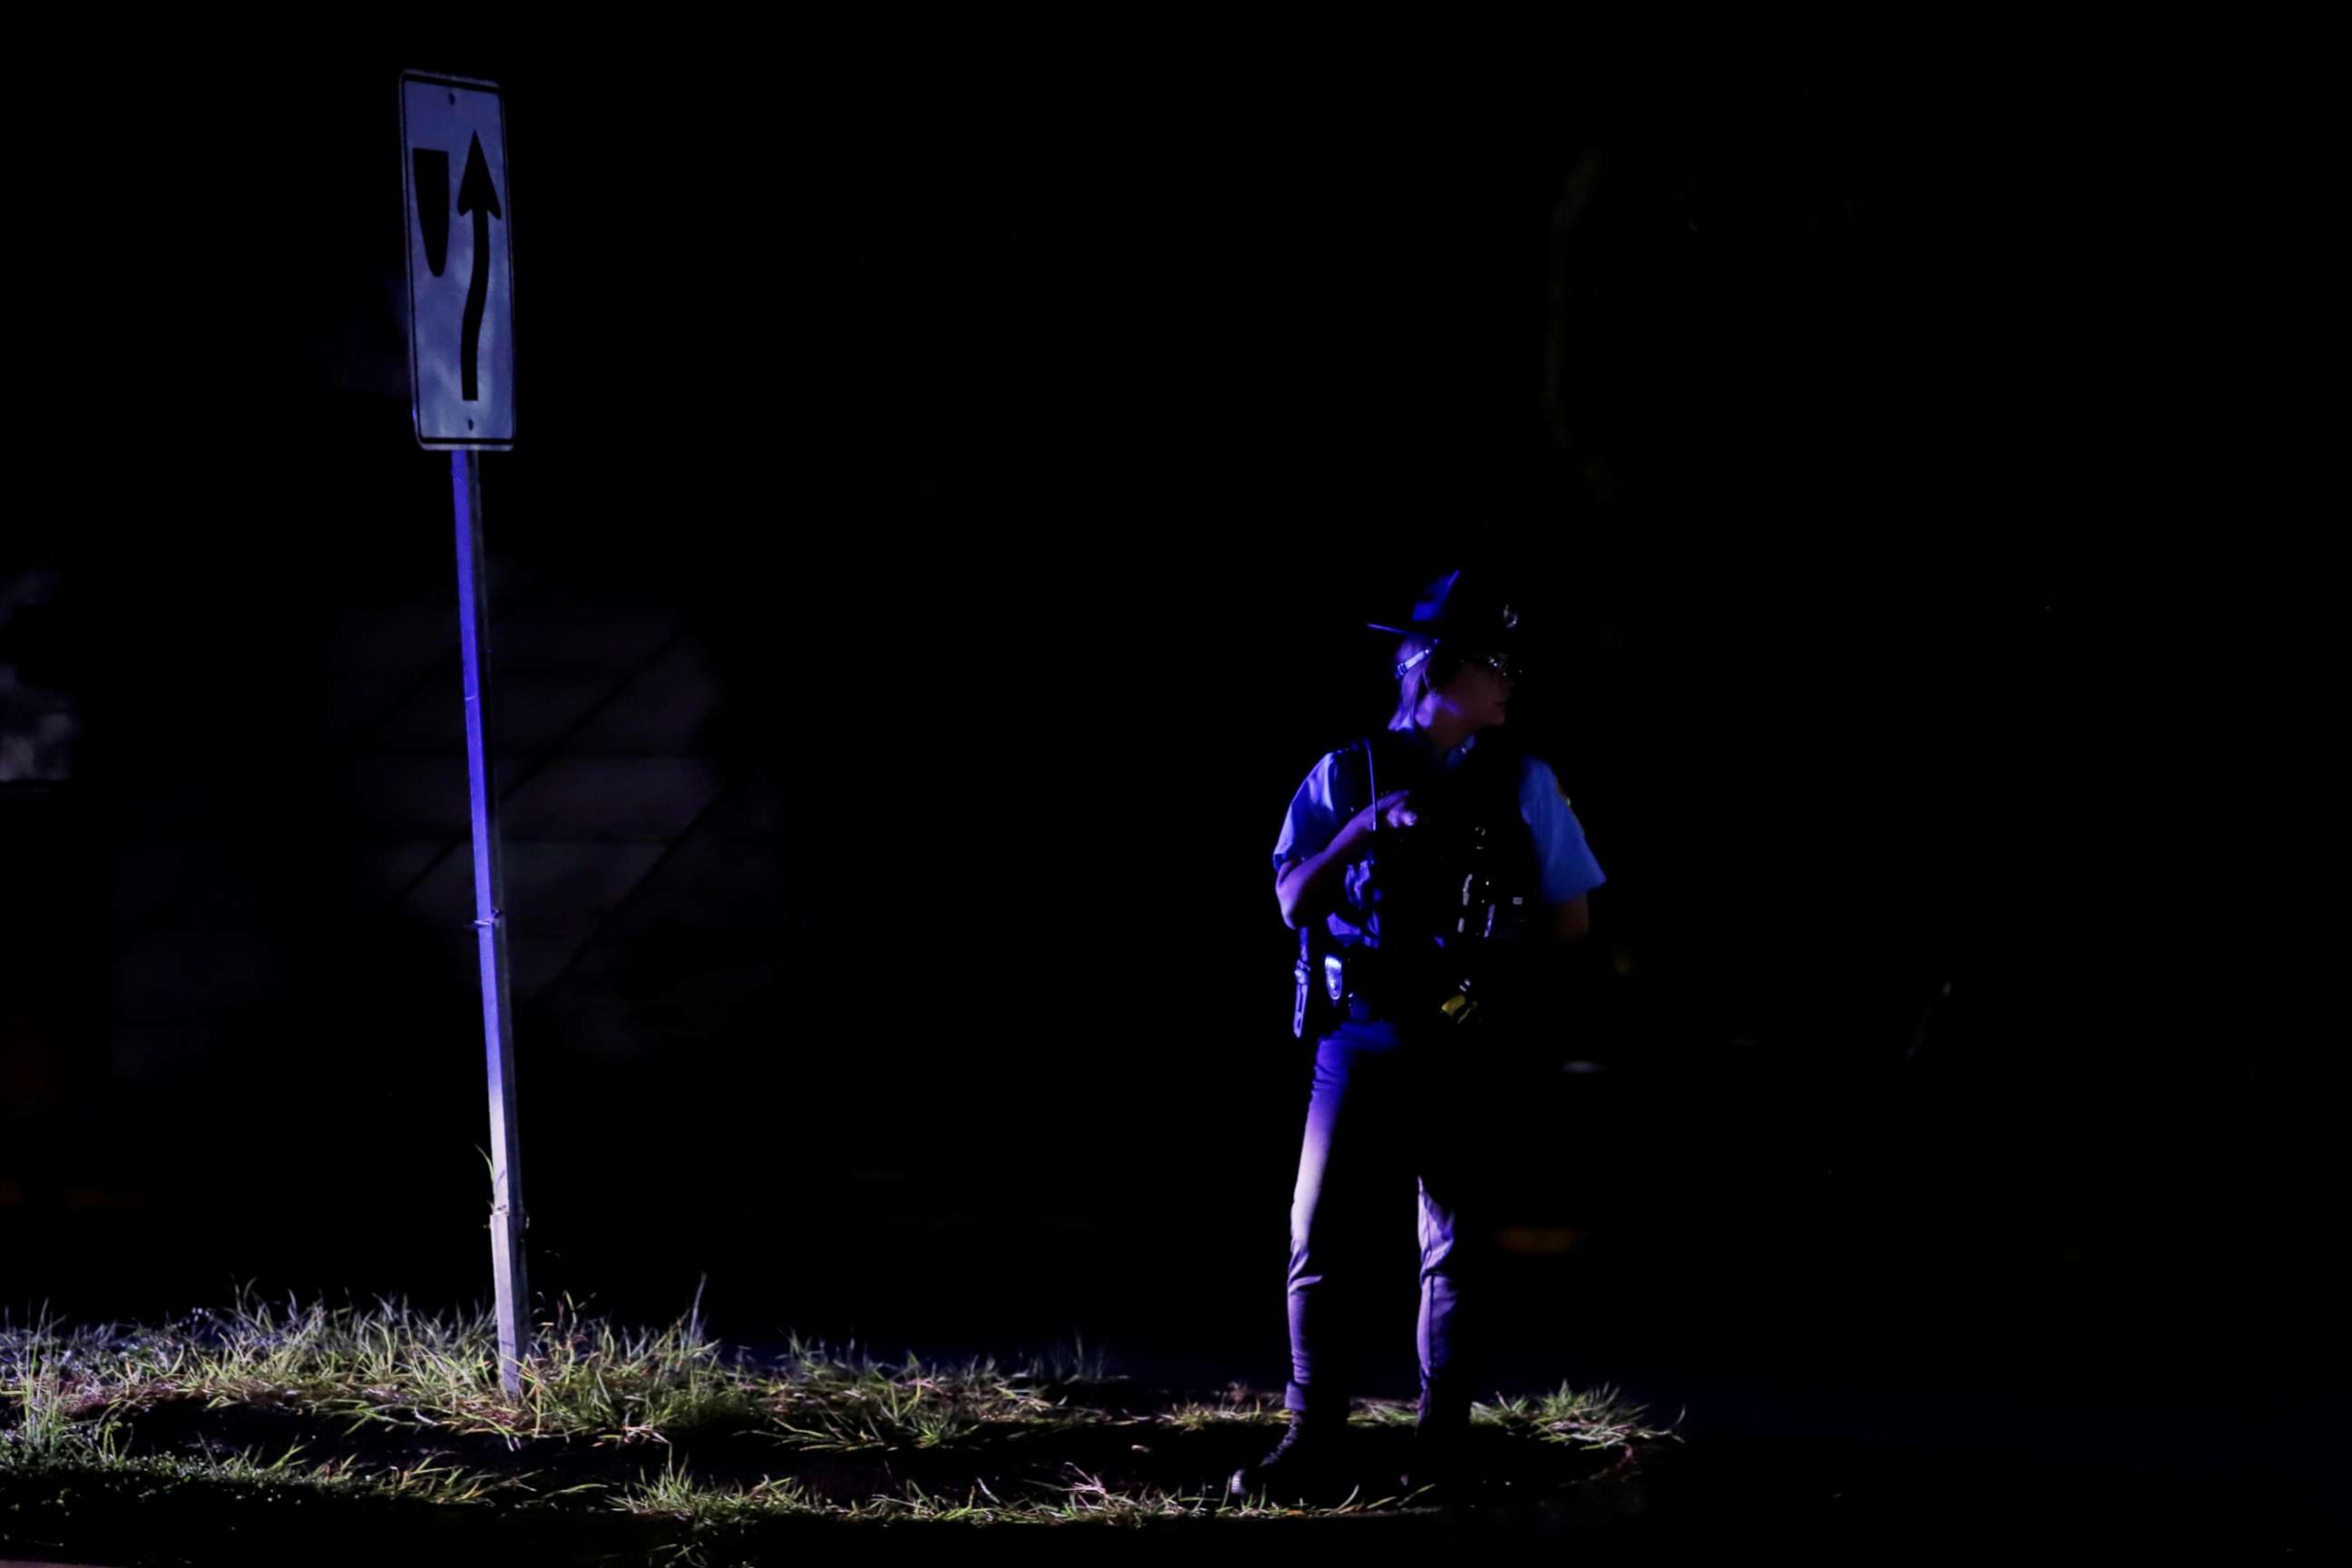 PHOTO: A policeman watches over the traffic in the dark after the fire registered in the Monacillos power substation, in San Juan, Puerto Rico, June 10, 2021.